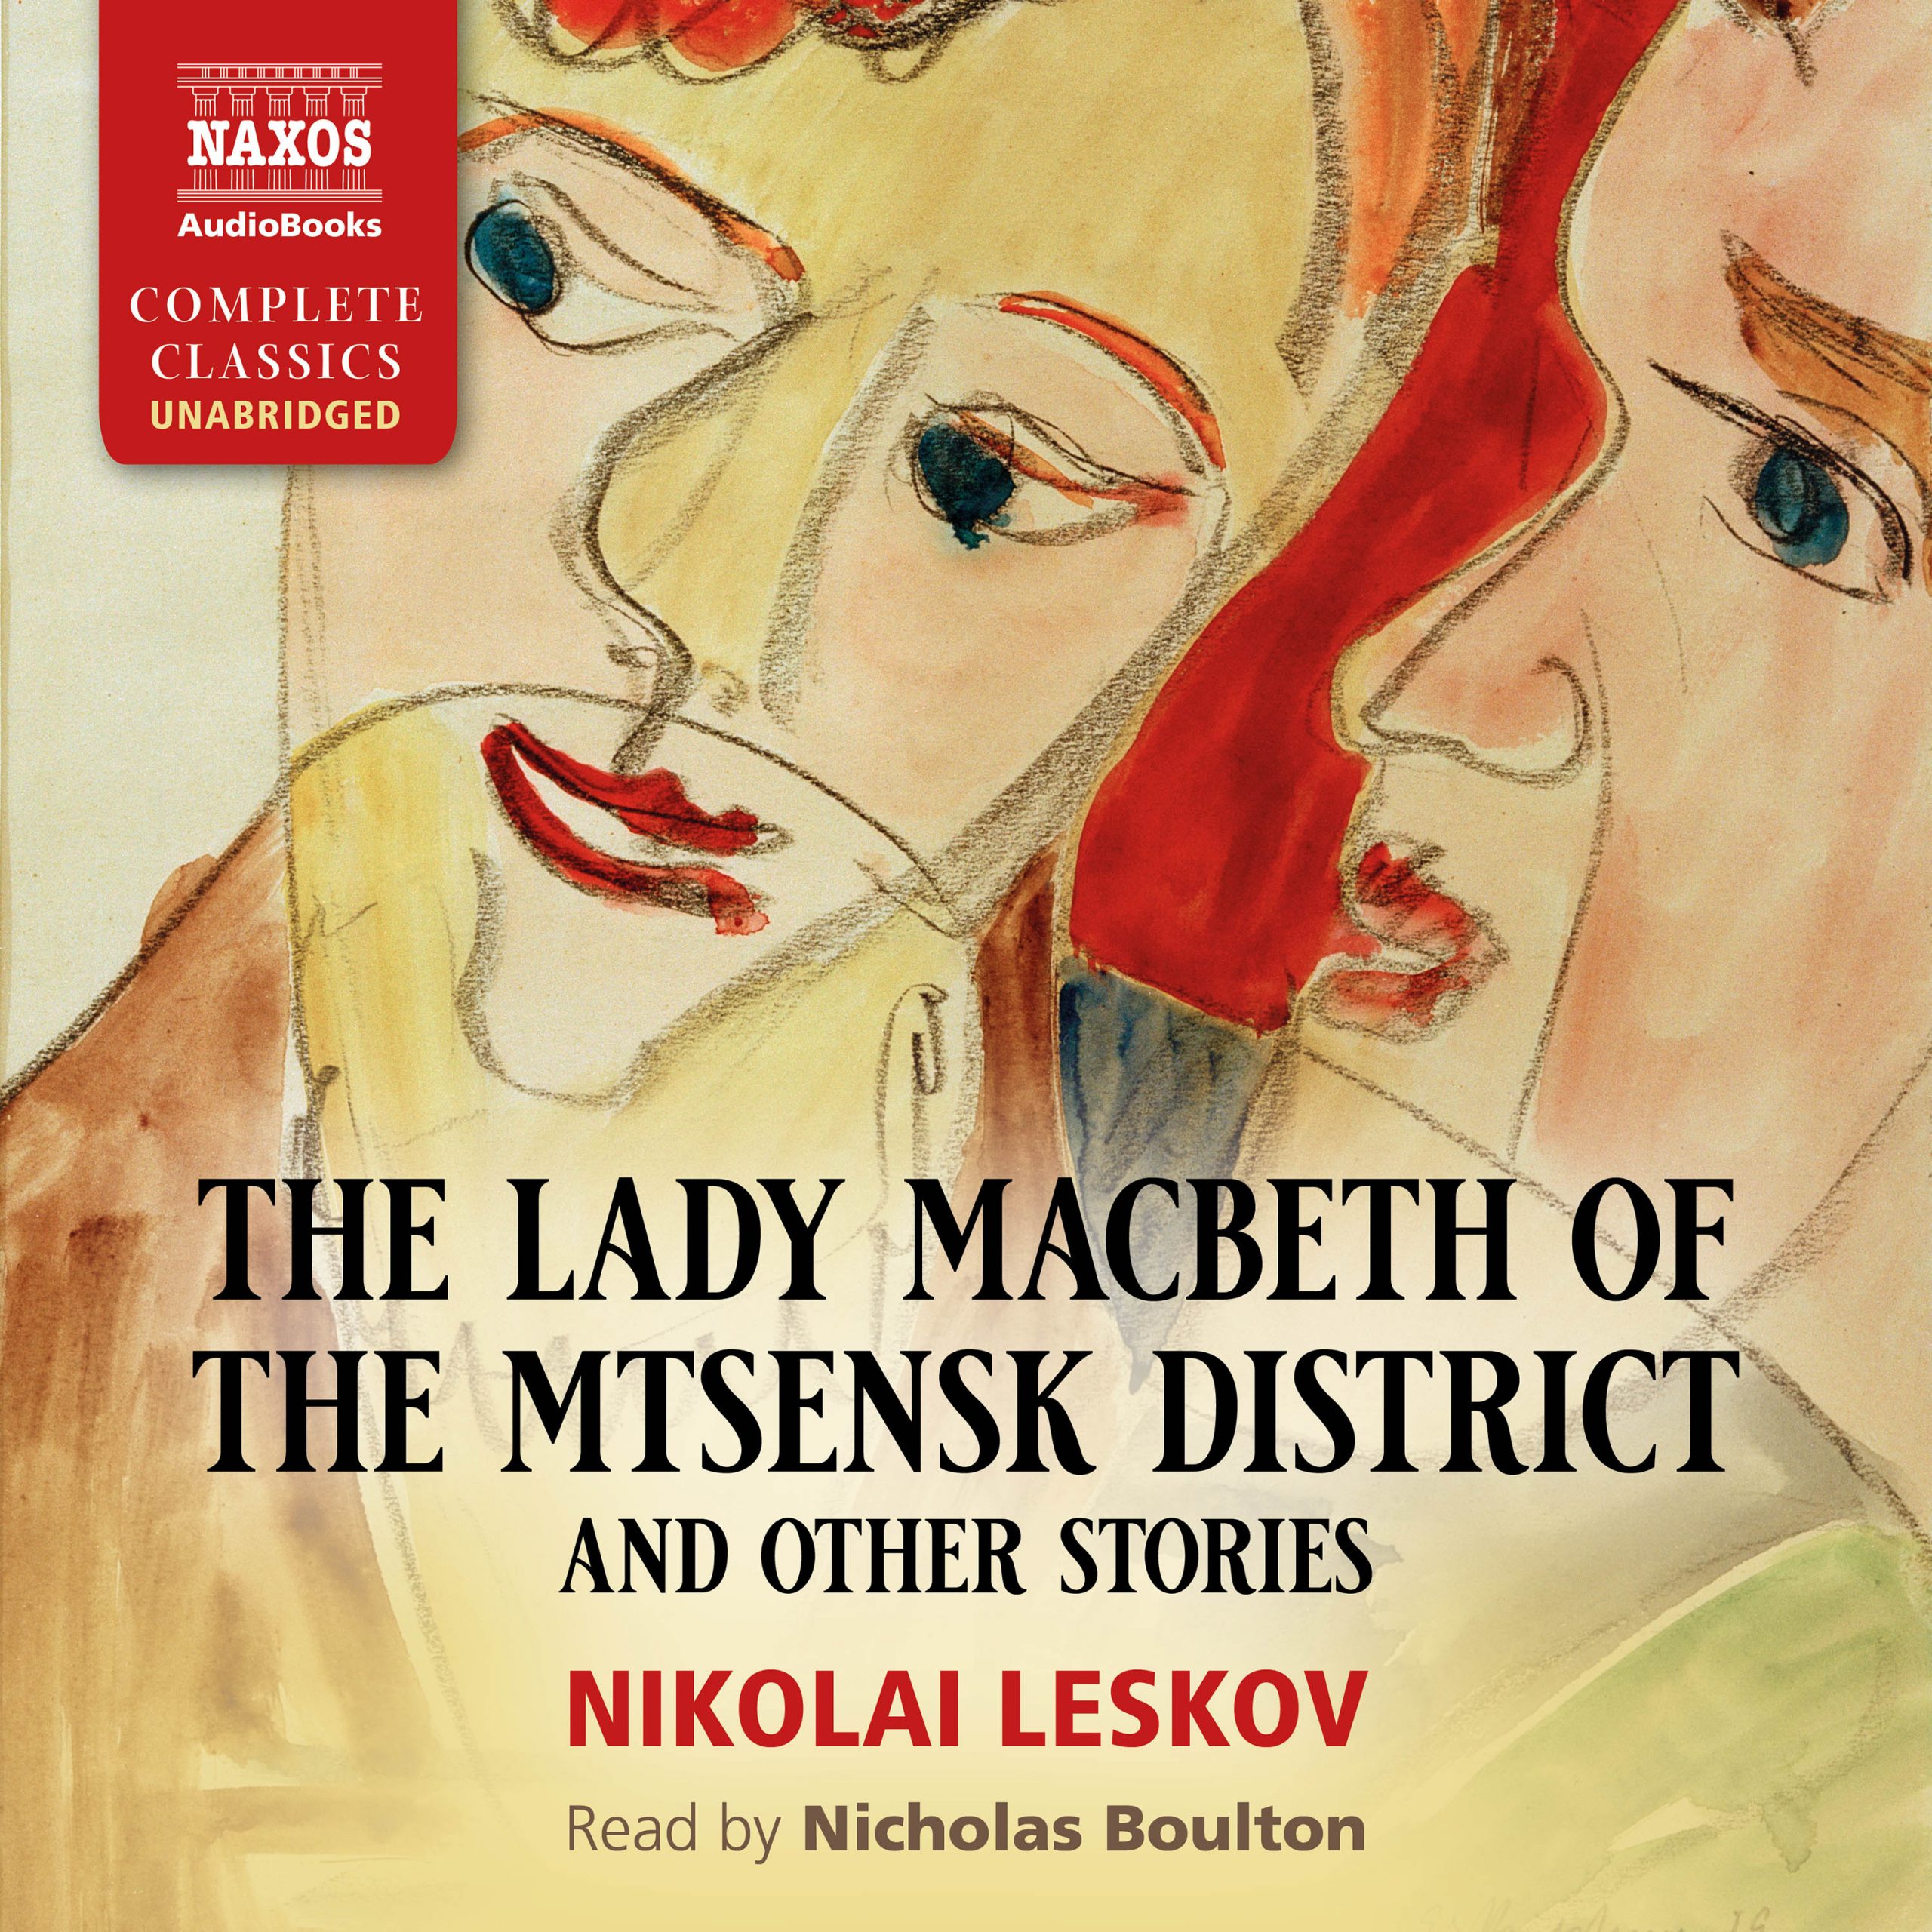 The Lady Macbeth of the Mtsensk District and Other Stories (unabridged)